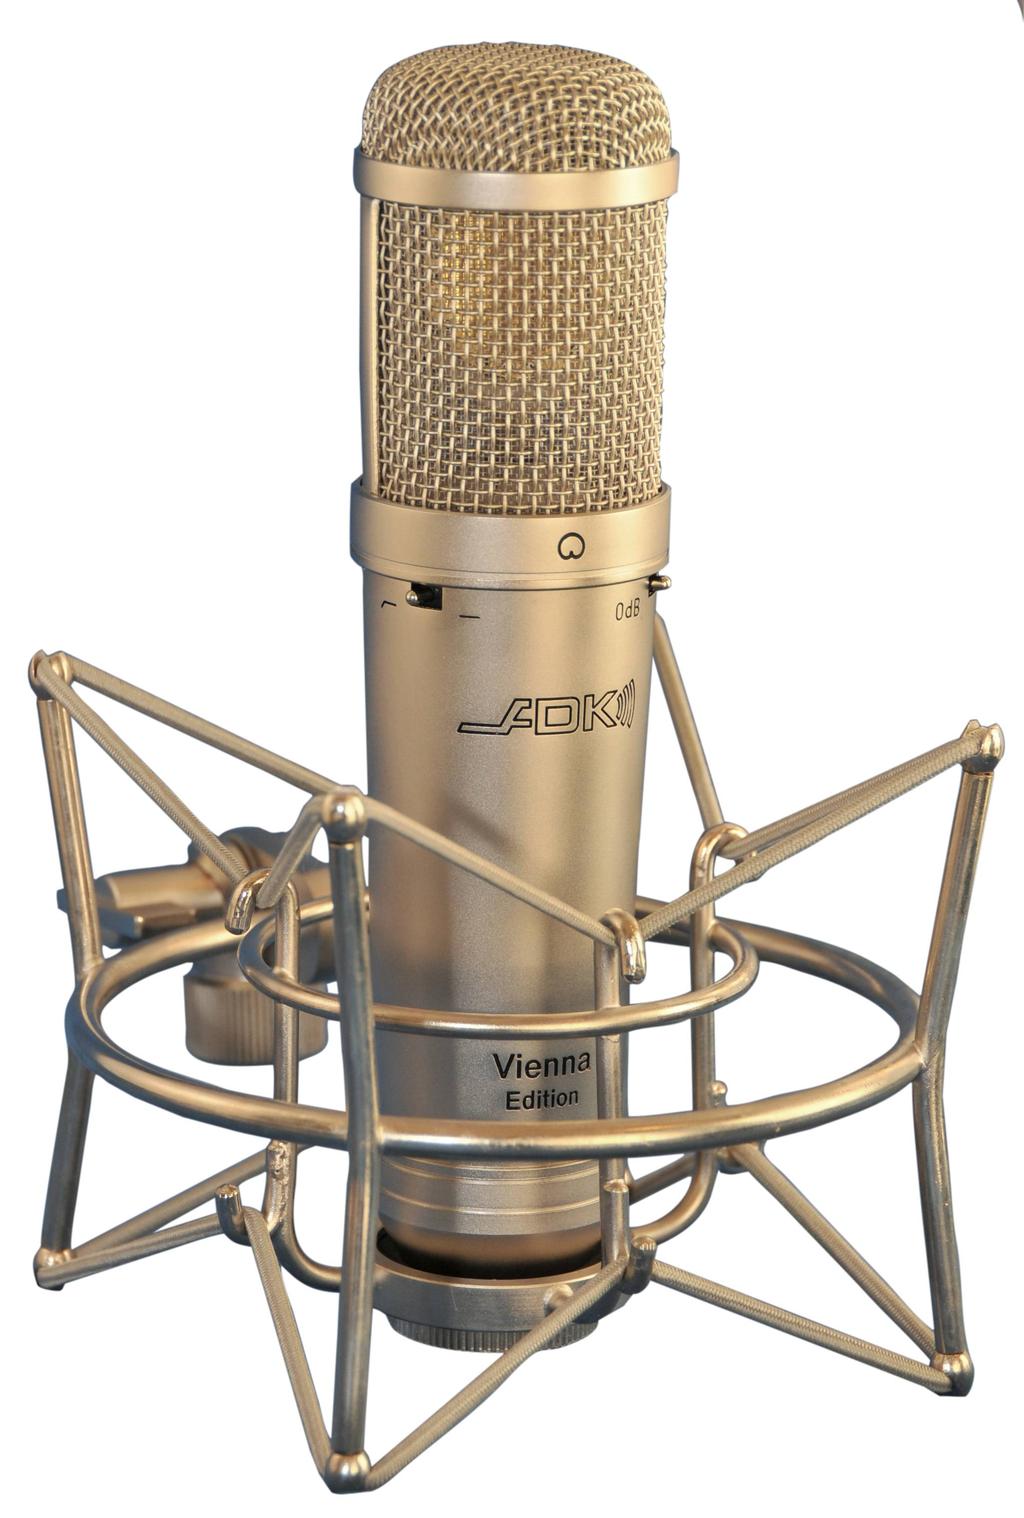 Response-Curve Designed to Replicate a Vintage Late 1950 s German Tube (Valve) Mic. Hamburg Mk 8 is the Eighth Generation of ADK Microphones offering a Mellow, Robust Tonality.